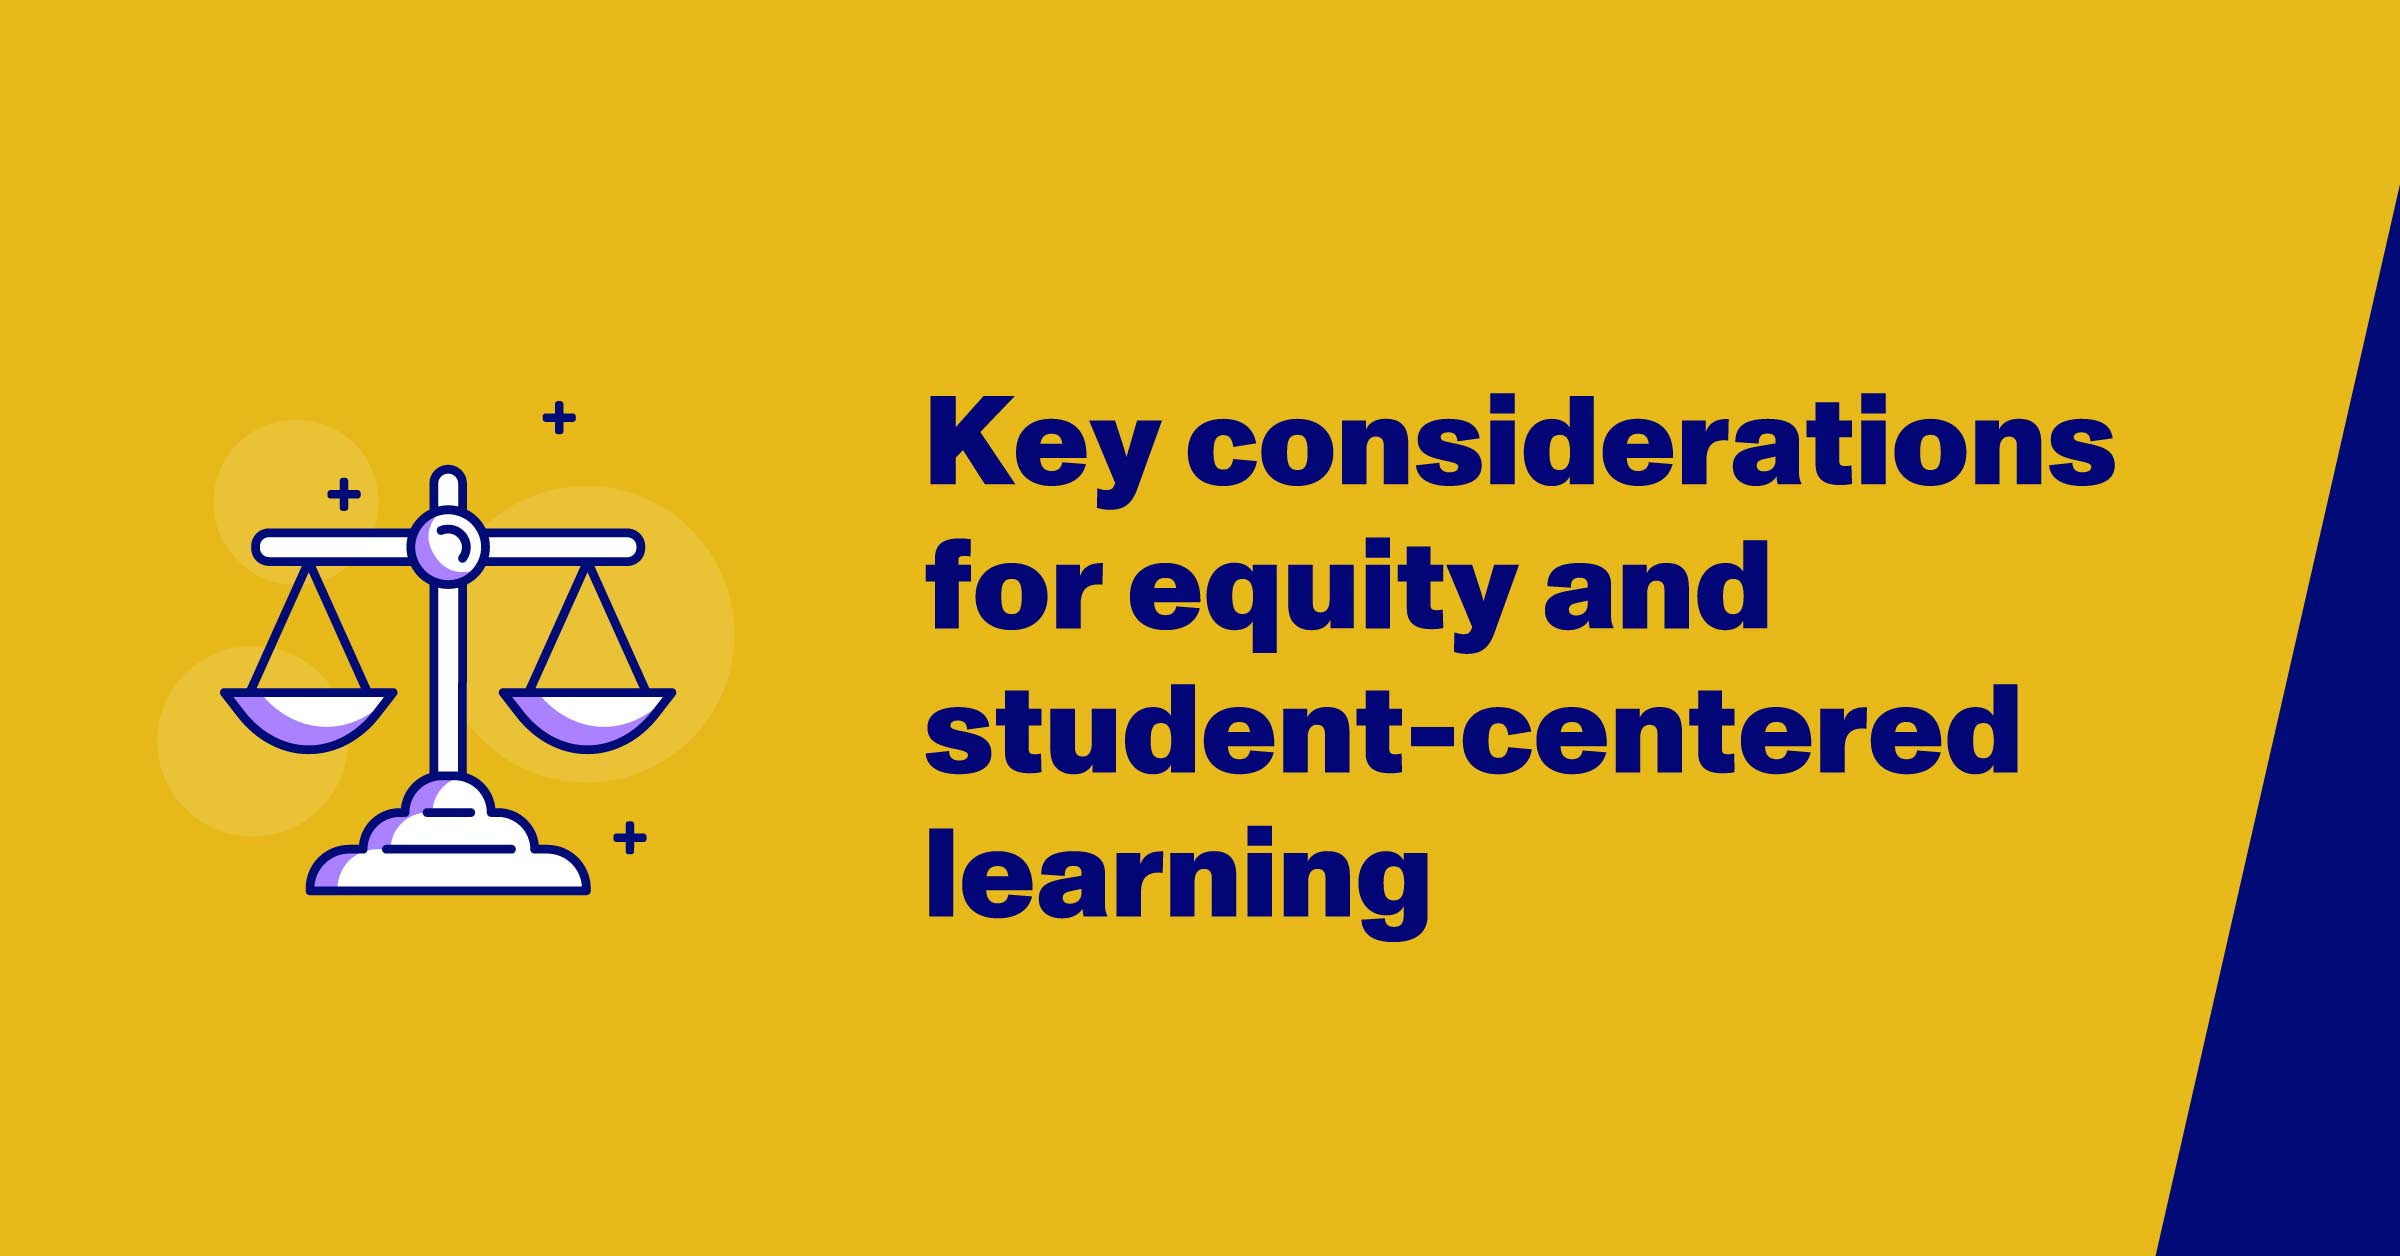 Key considerations for equity and student-centered learning